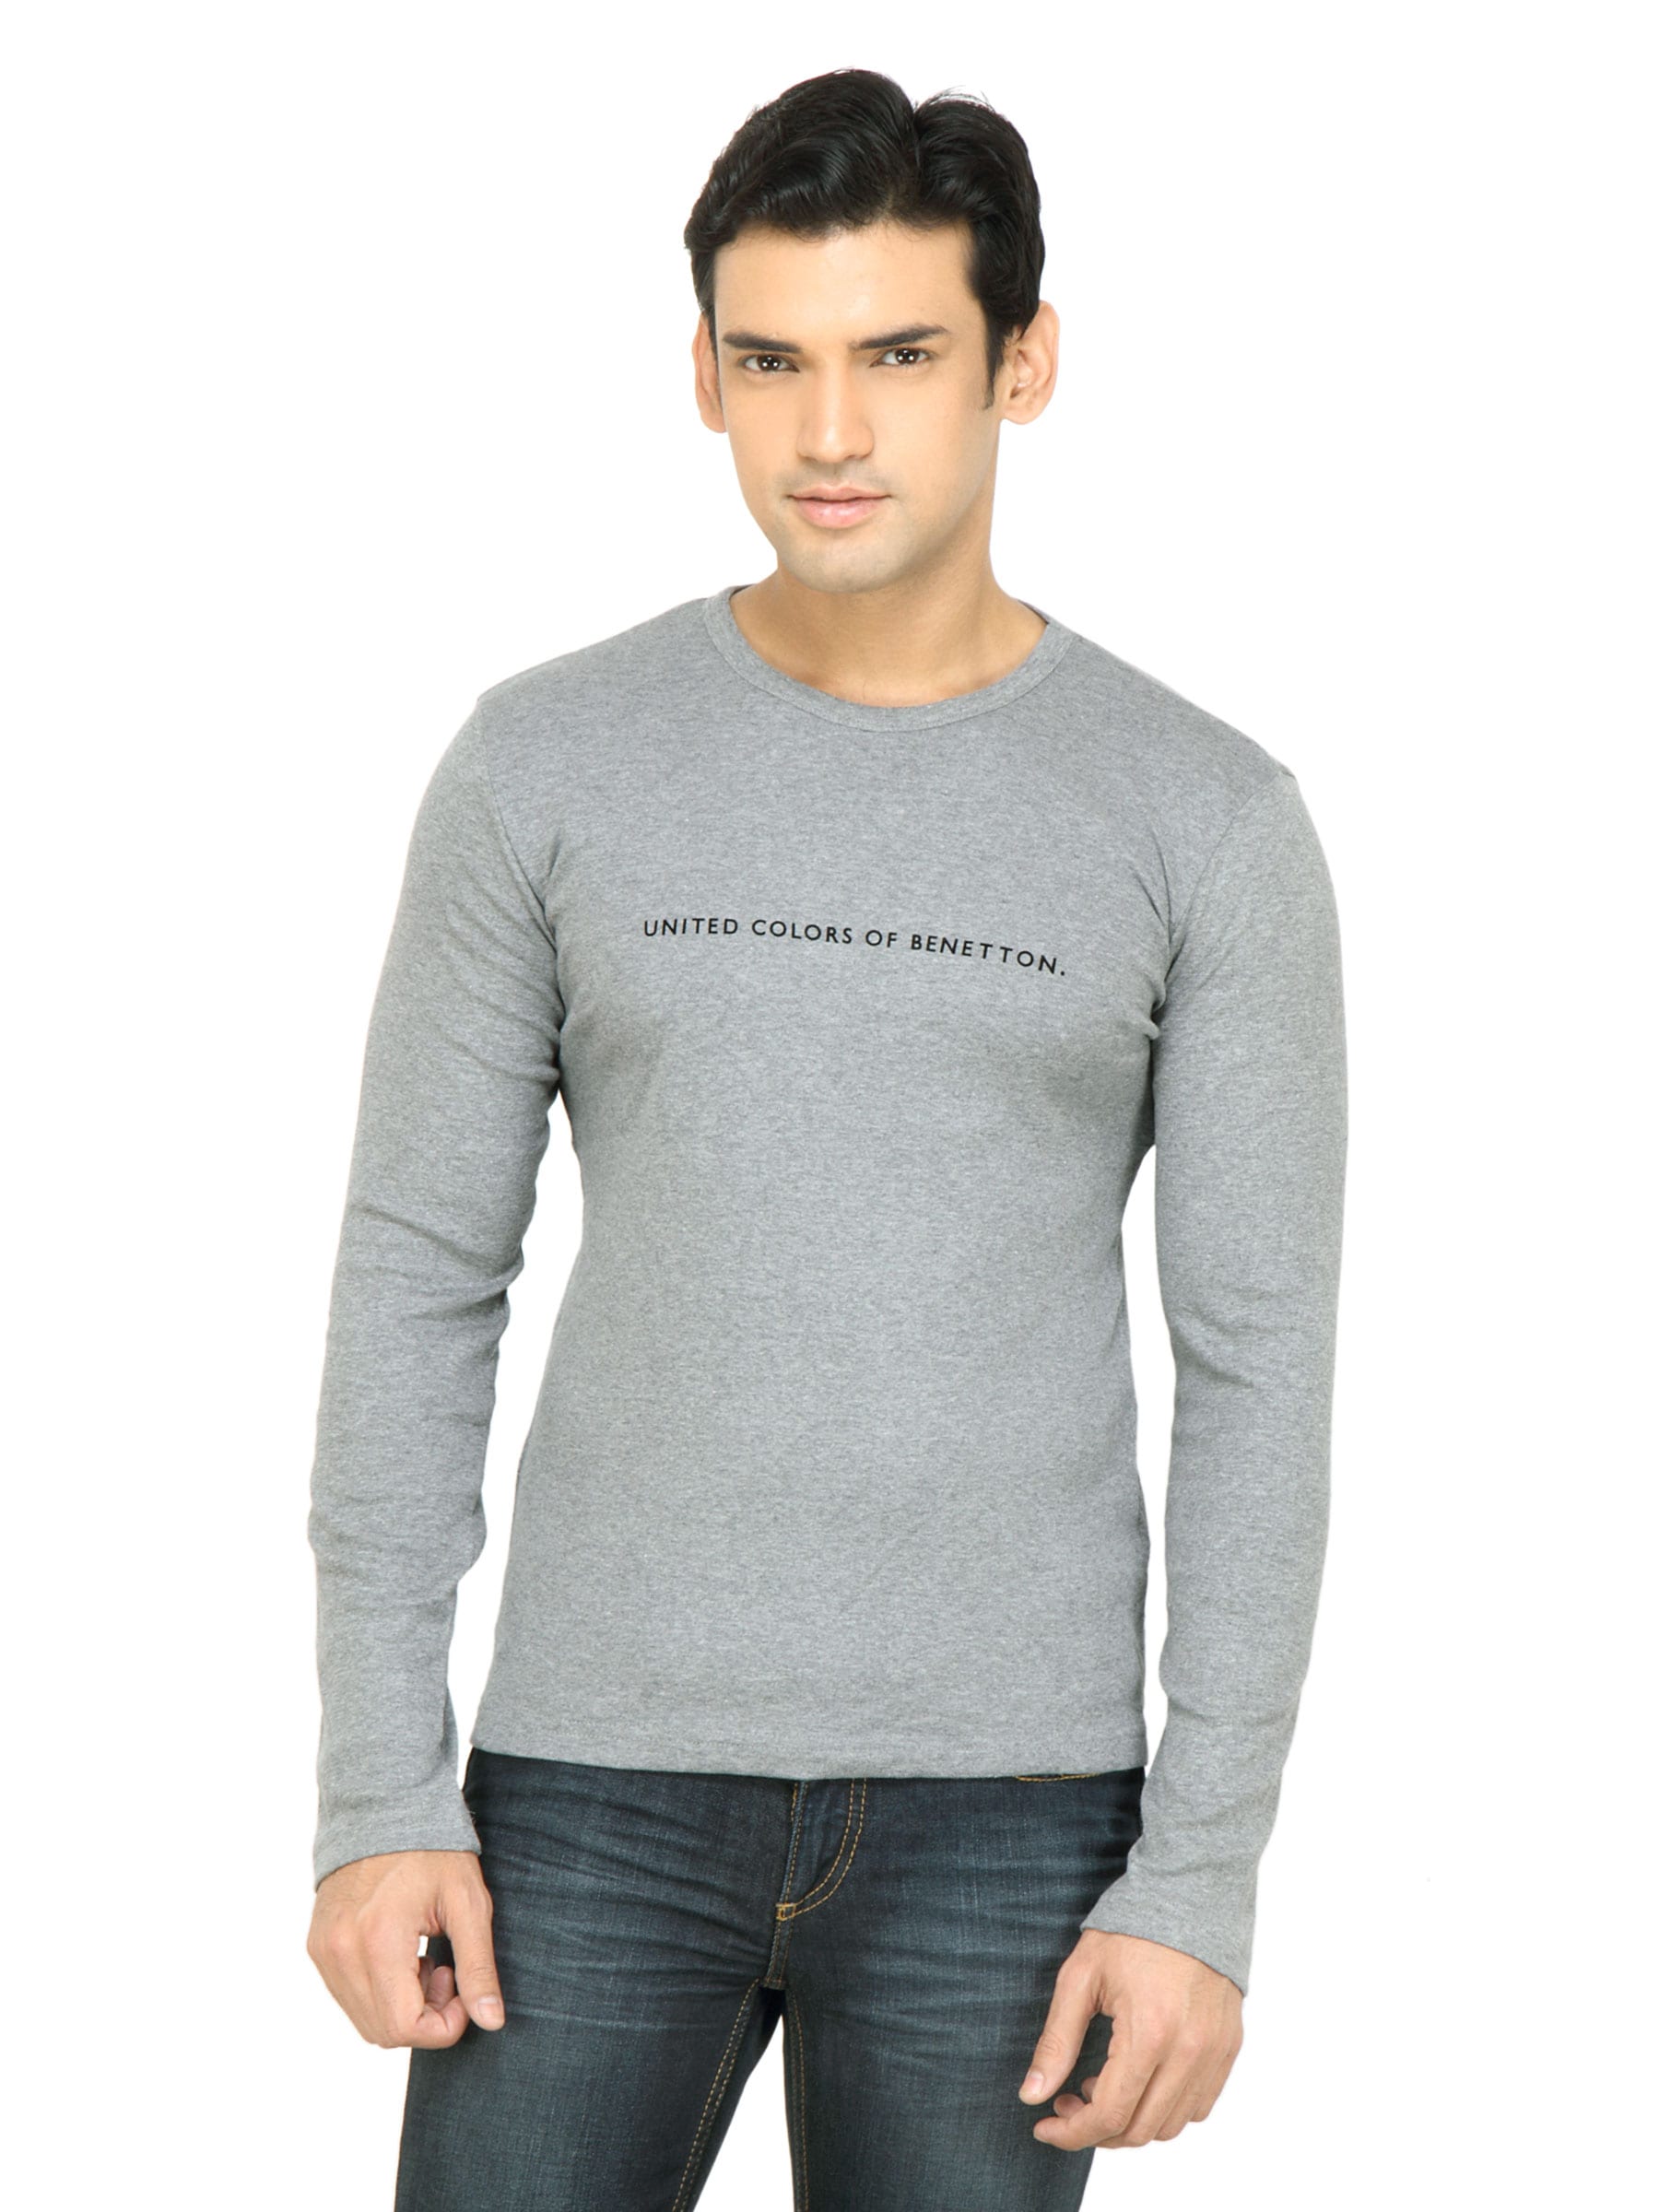 United Colors of Benetton Men Solid Grey T-shirt